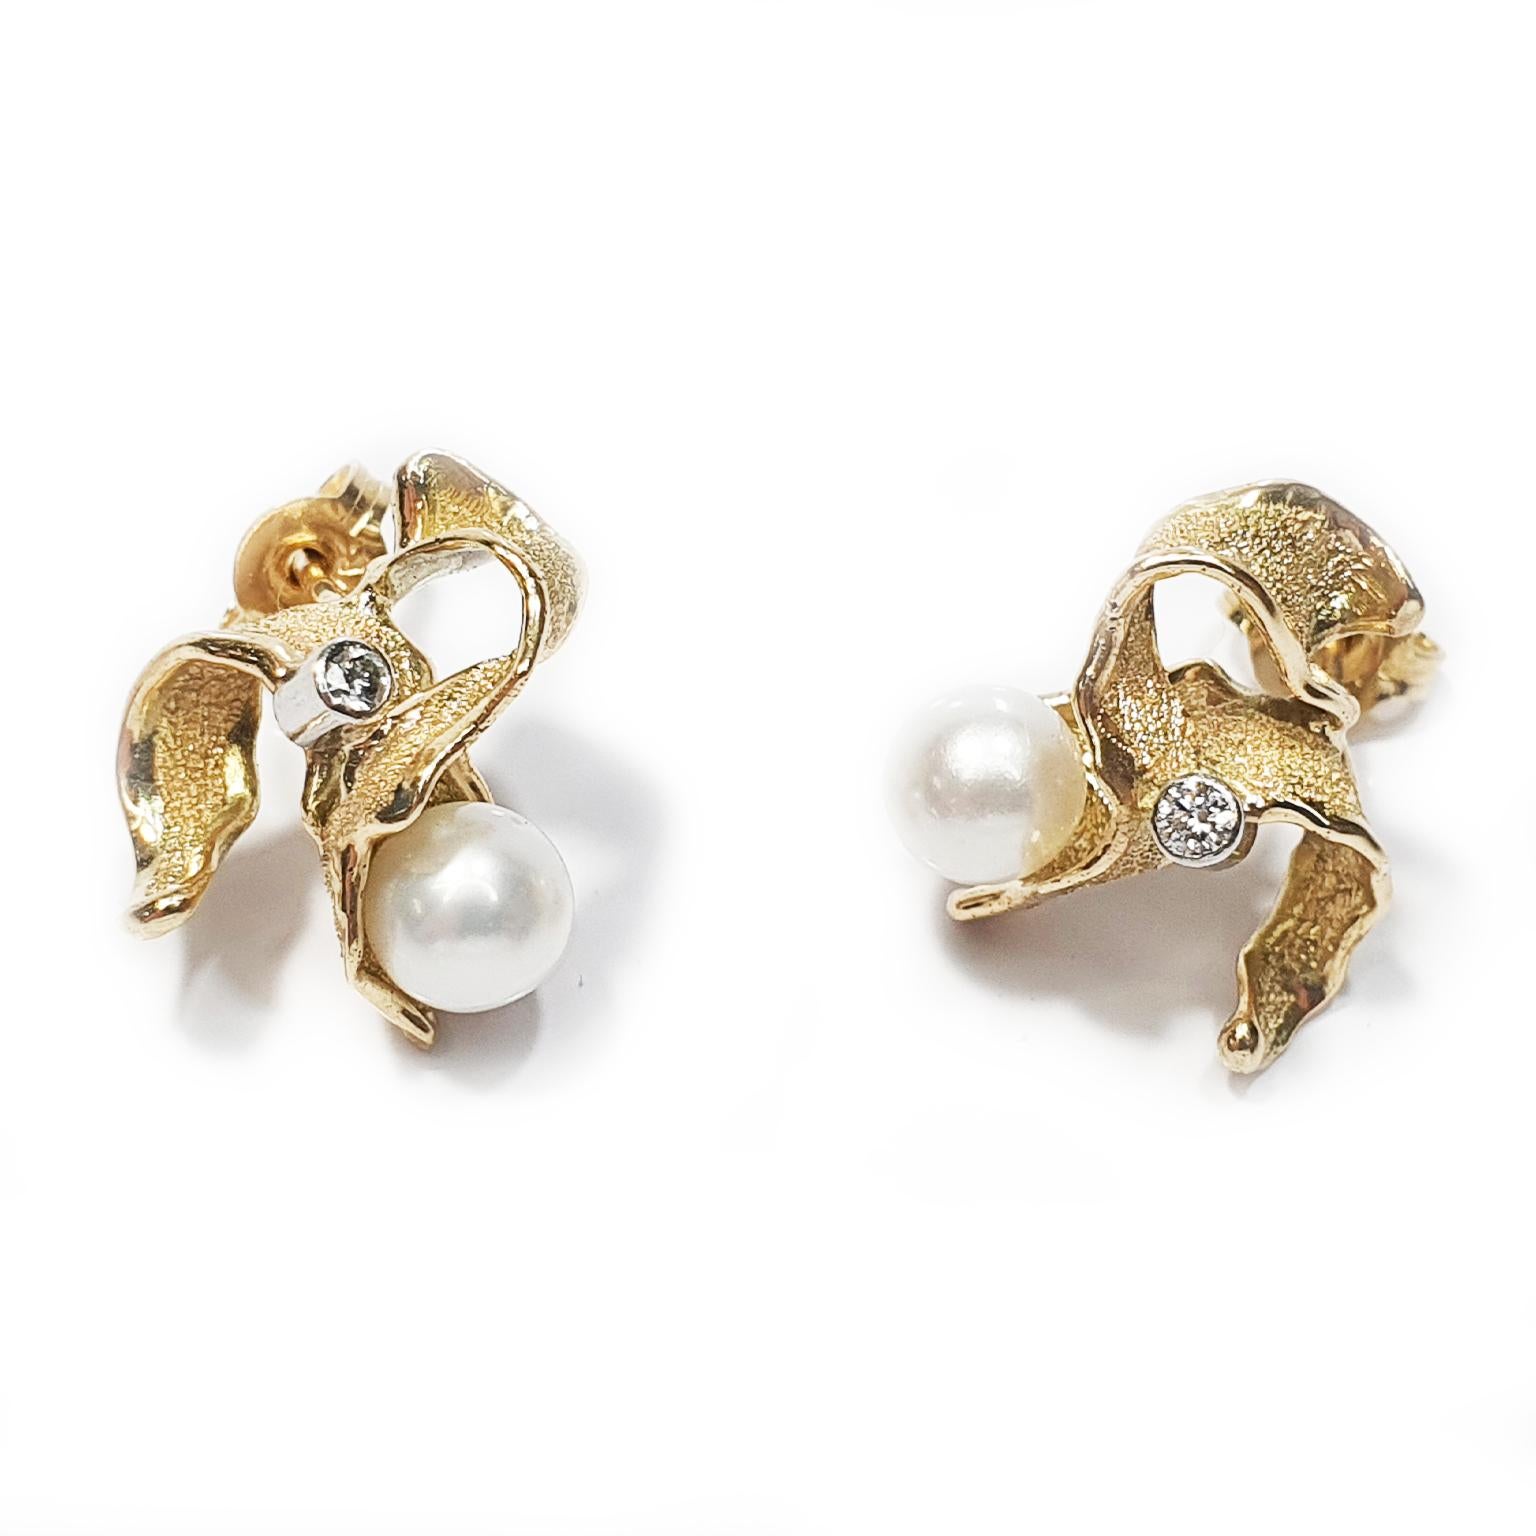 Paul Amey’s “Orchid” signature molten edge freshwater pearl earrings resemble a stylized orchid and are crafted from 9K yellow gold and platinum and each earring features a 2pt diamond and finished with Paul Amey’s signature texture. The earrings